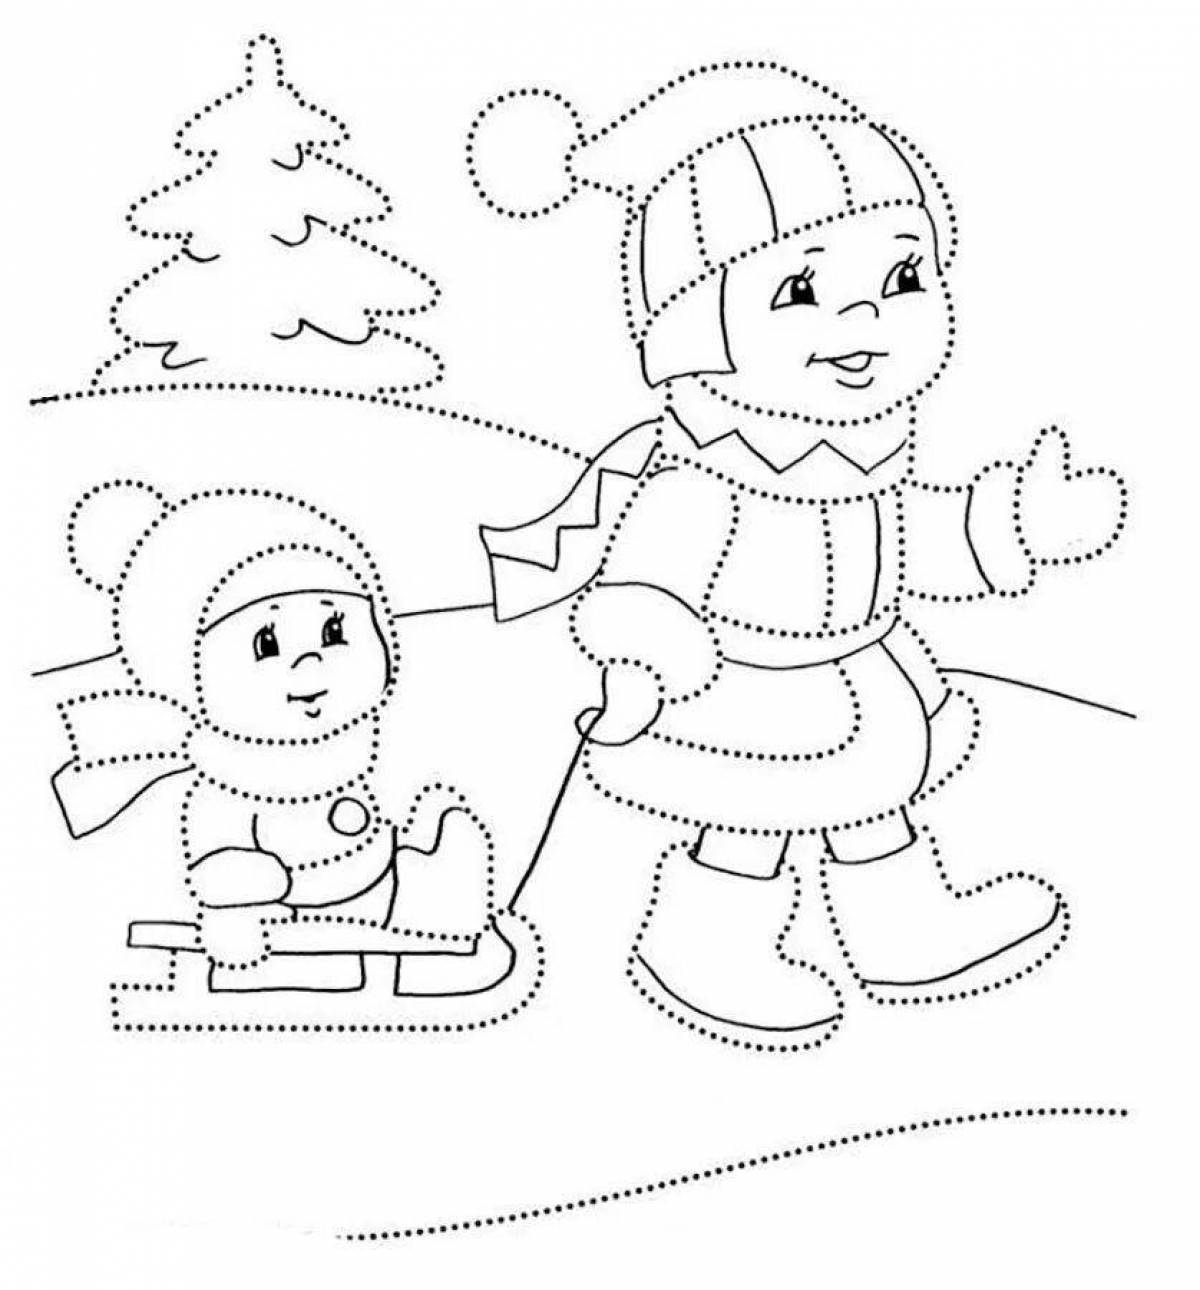 Great winter fun coloring page